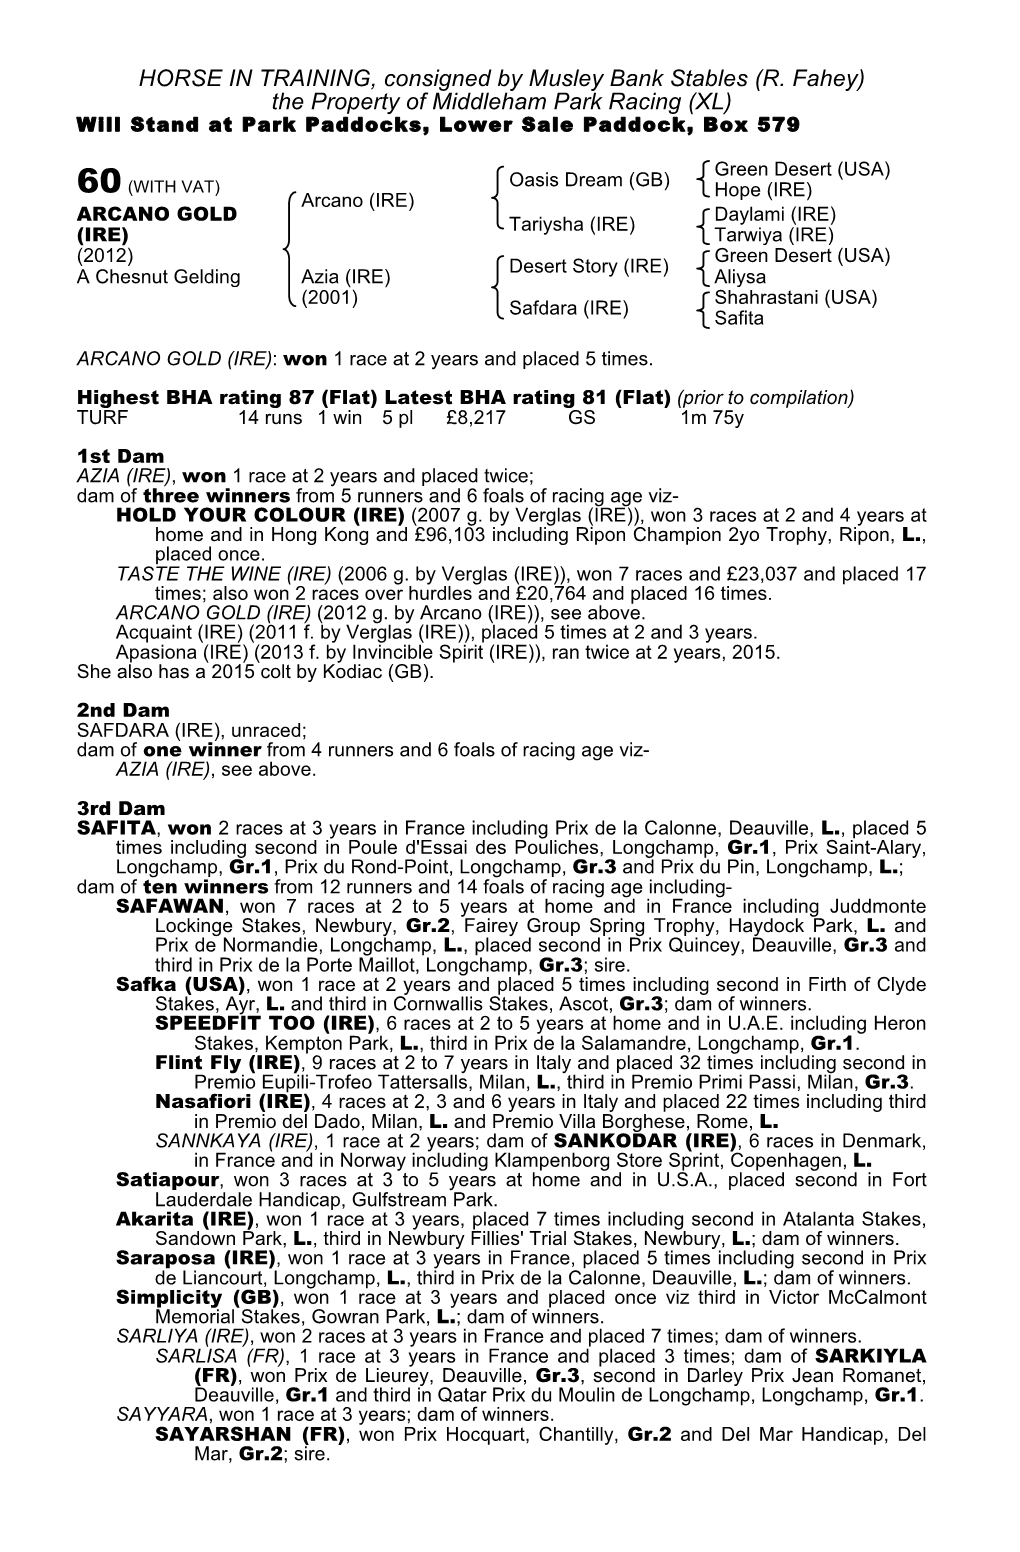 HORSE in TRAINING, Consigned by Musley Bank Stables (R. Fahey) the Property of Middleham Park Racing (XL) Will Stand at Park Paddocks, Lower Sale Paddock, Box 579